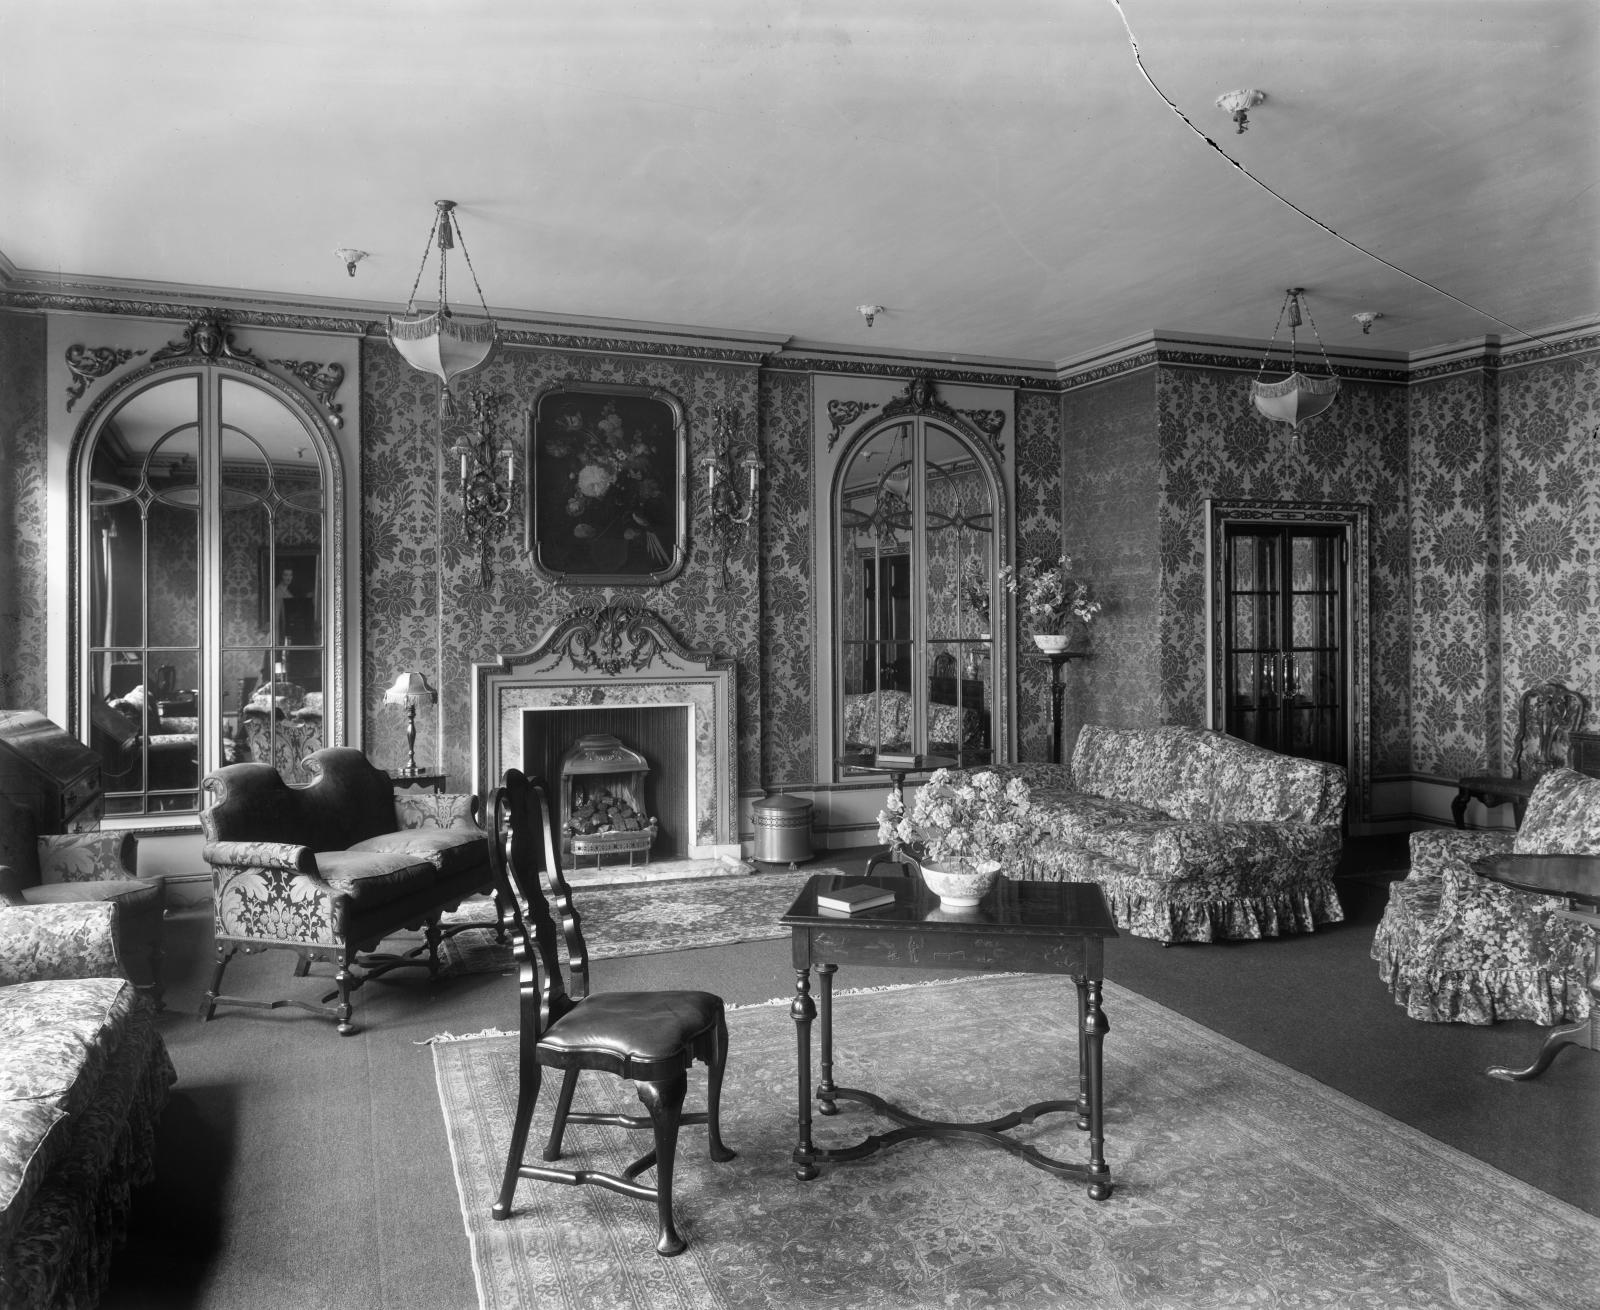 Elaborately decorated room with sofas, armchairs, and table